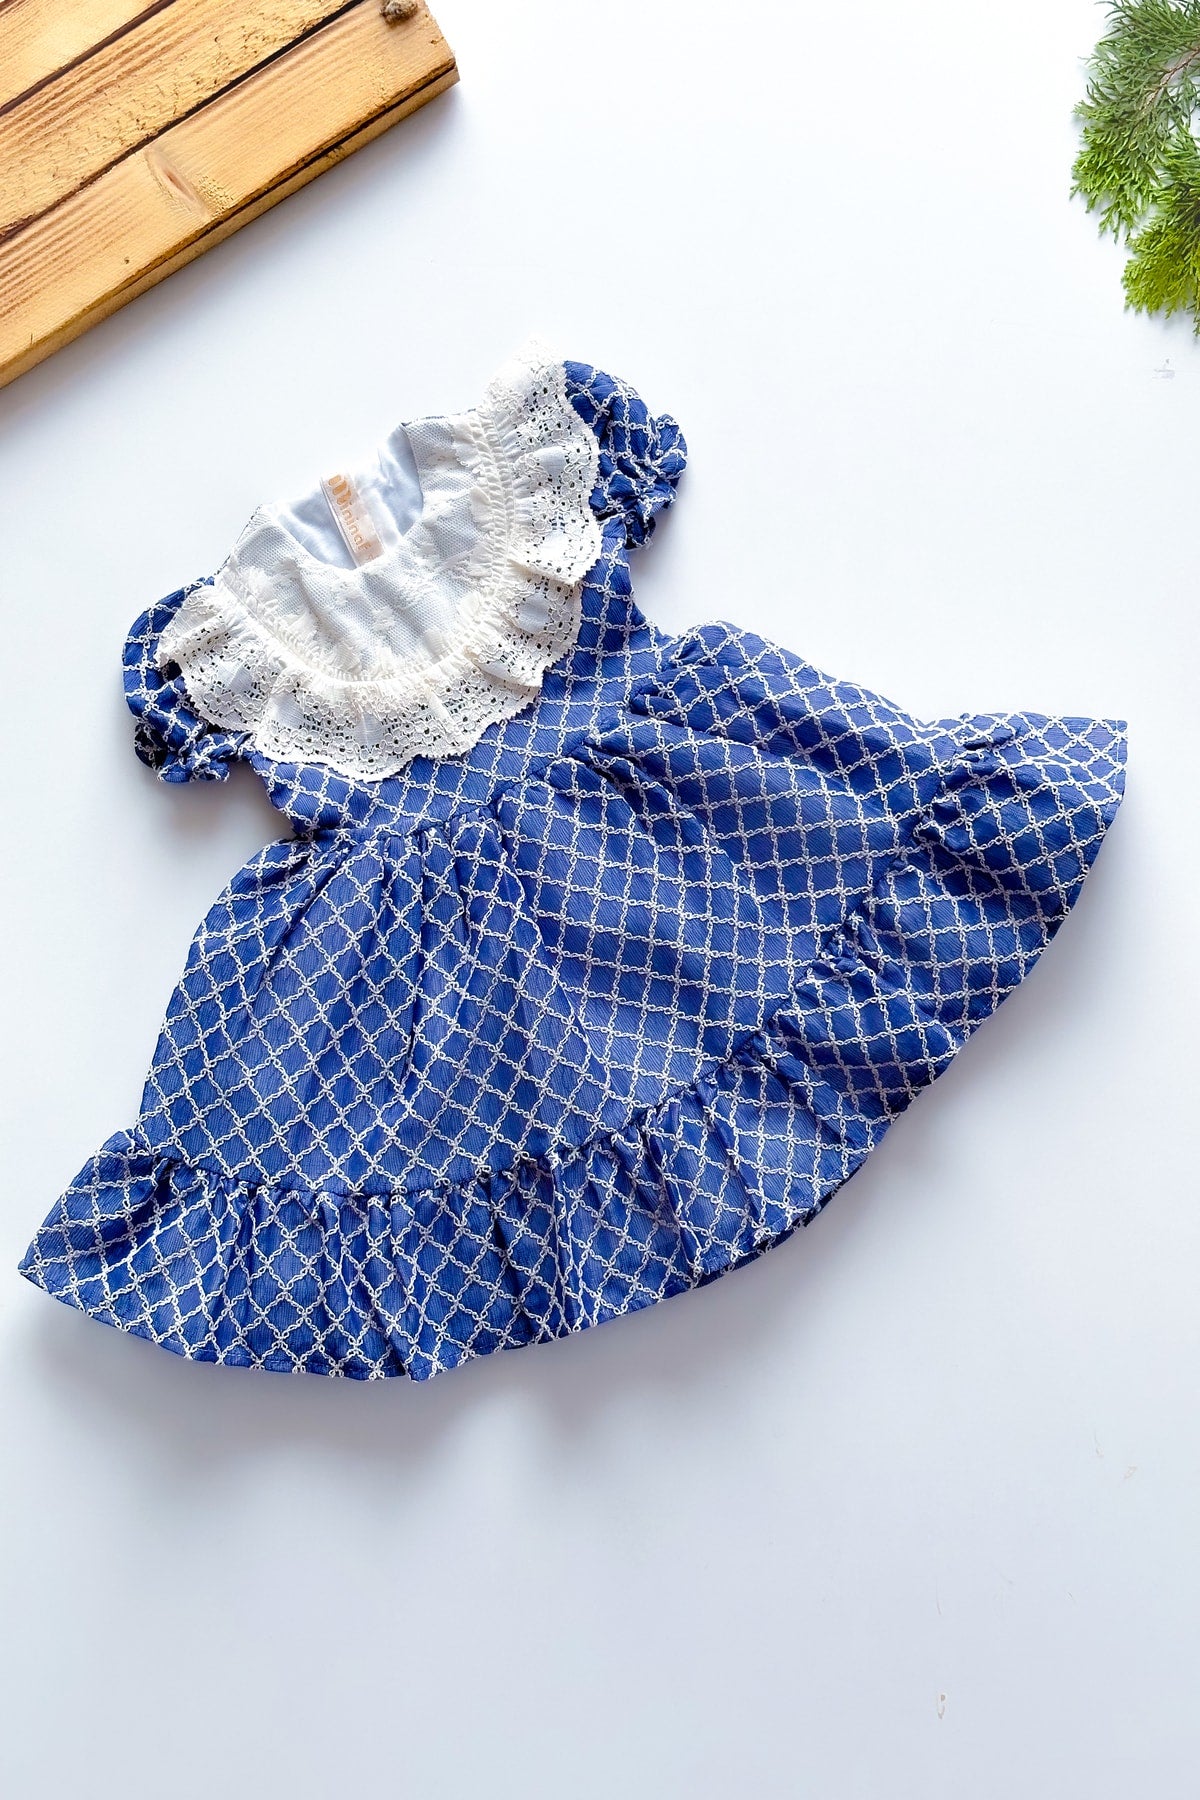 Baby Girl Girl Summer Dress Short Sleeve Tulle Tutu Lined Baby Suit Baby Clothing